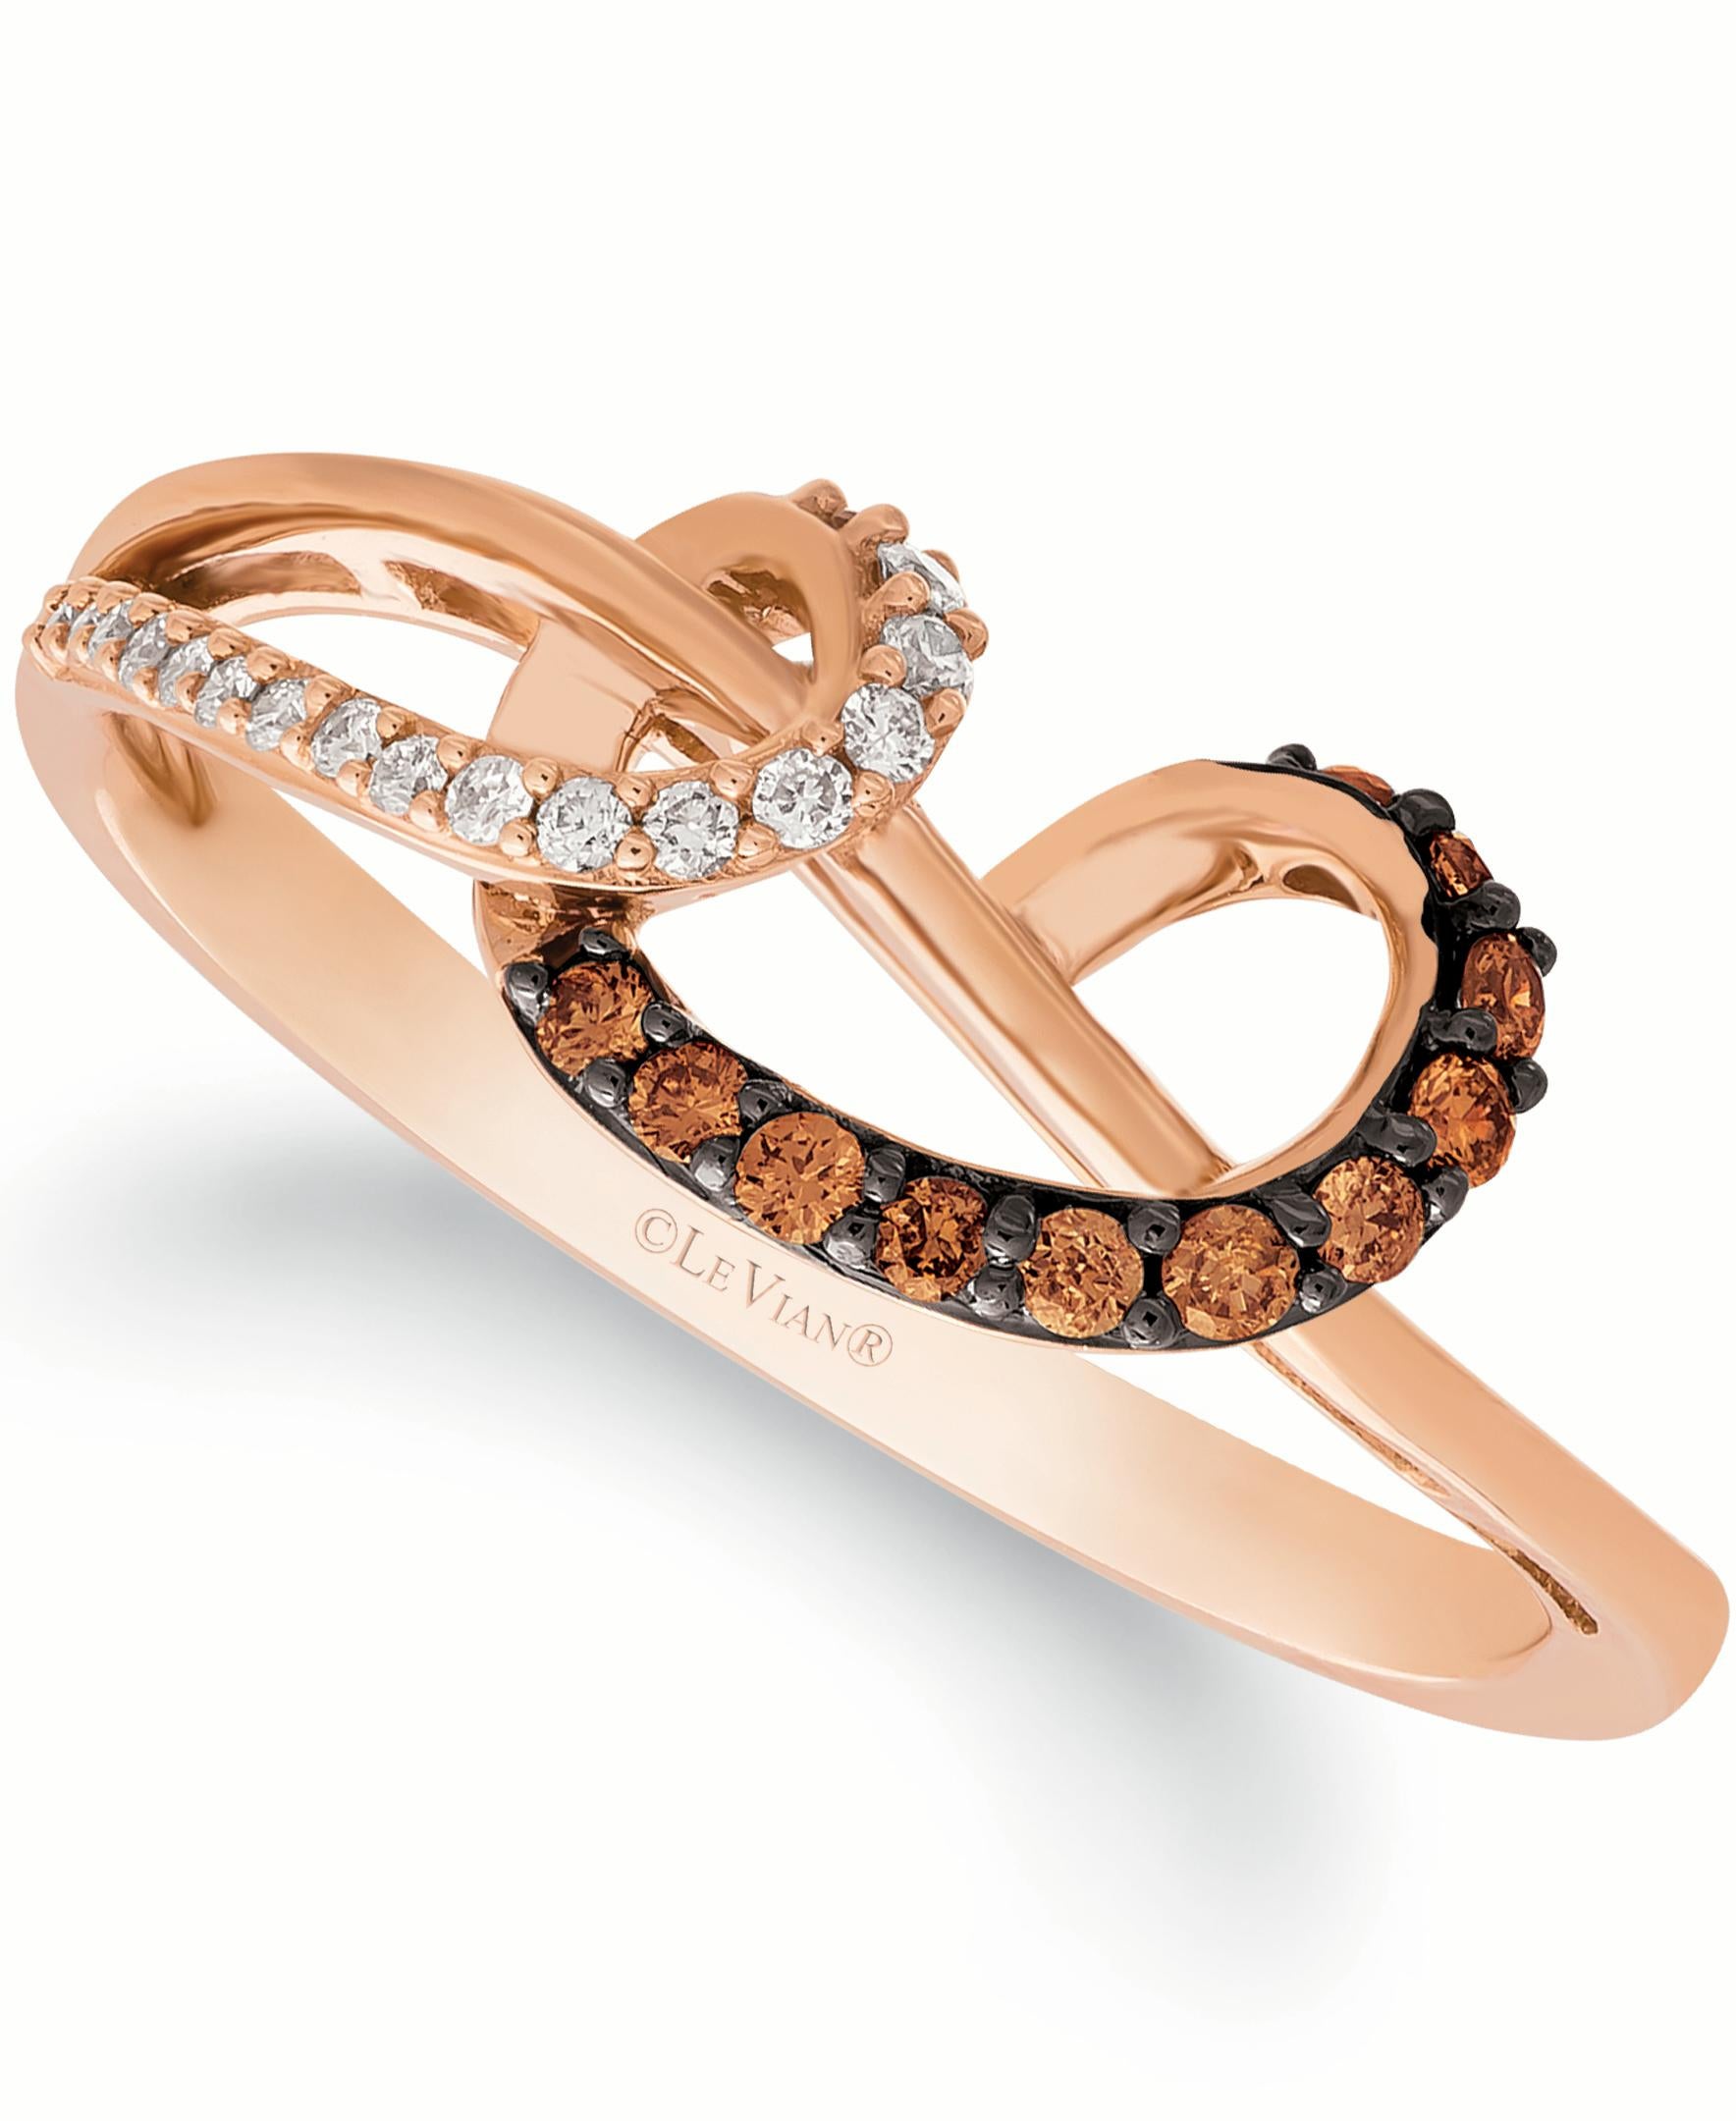 LeVian 14K Rose Gold Round Chocolate Brown Diamond Classic Pretty Cocktail Ring
